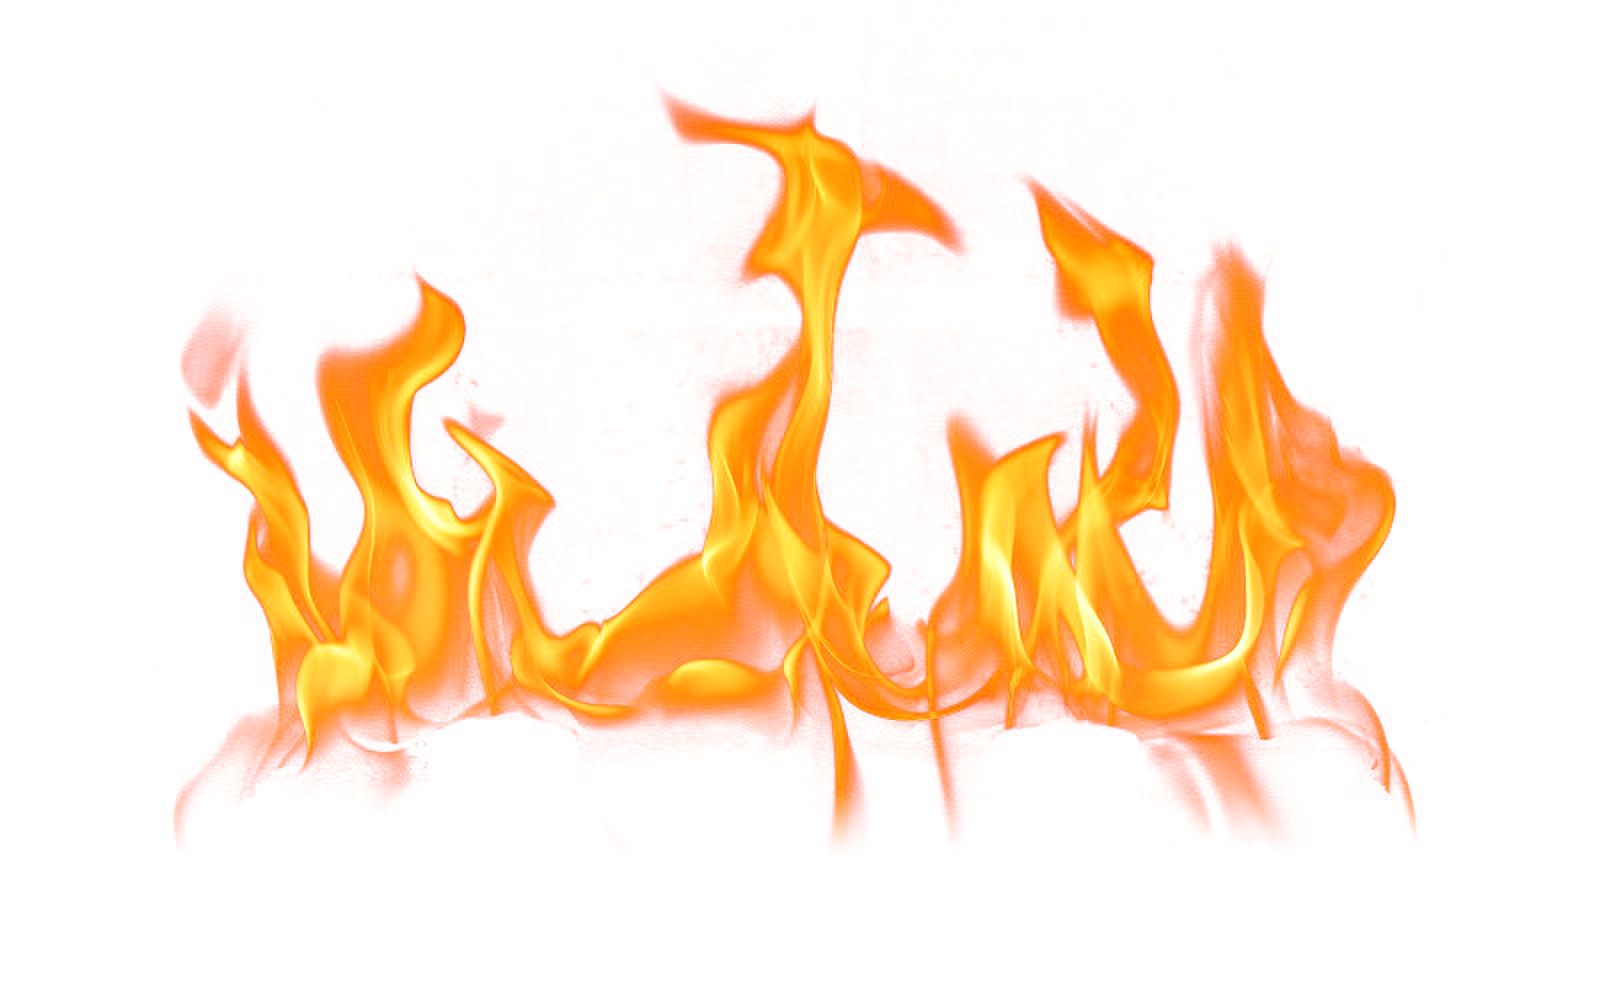 Fire mini series materialistic. Flames clipart real flame